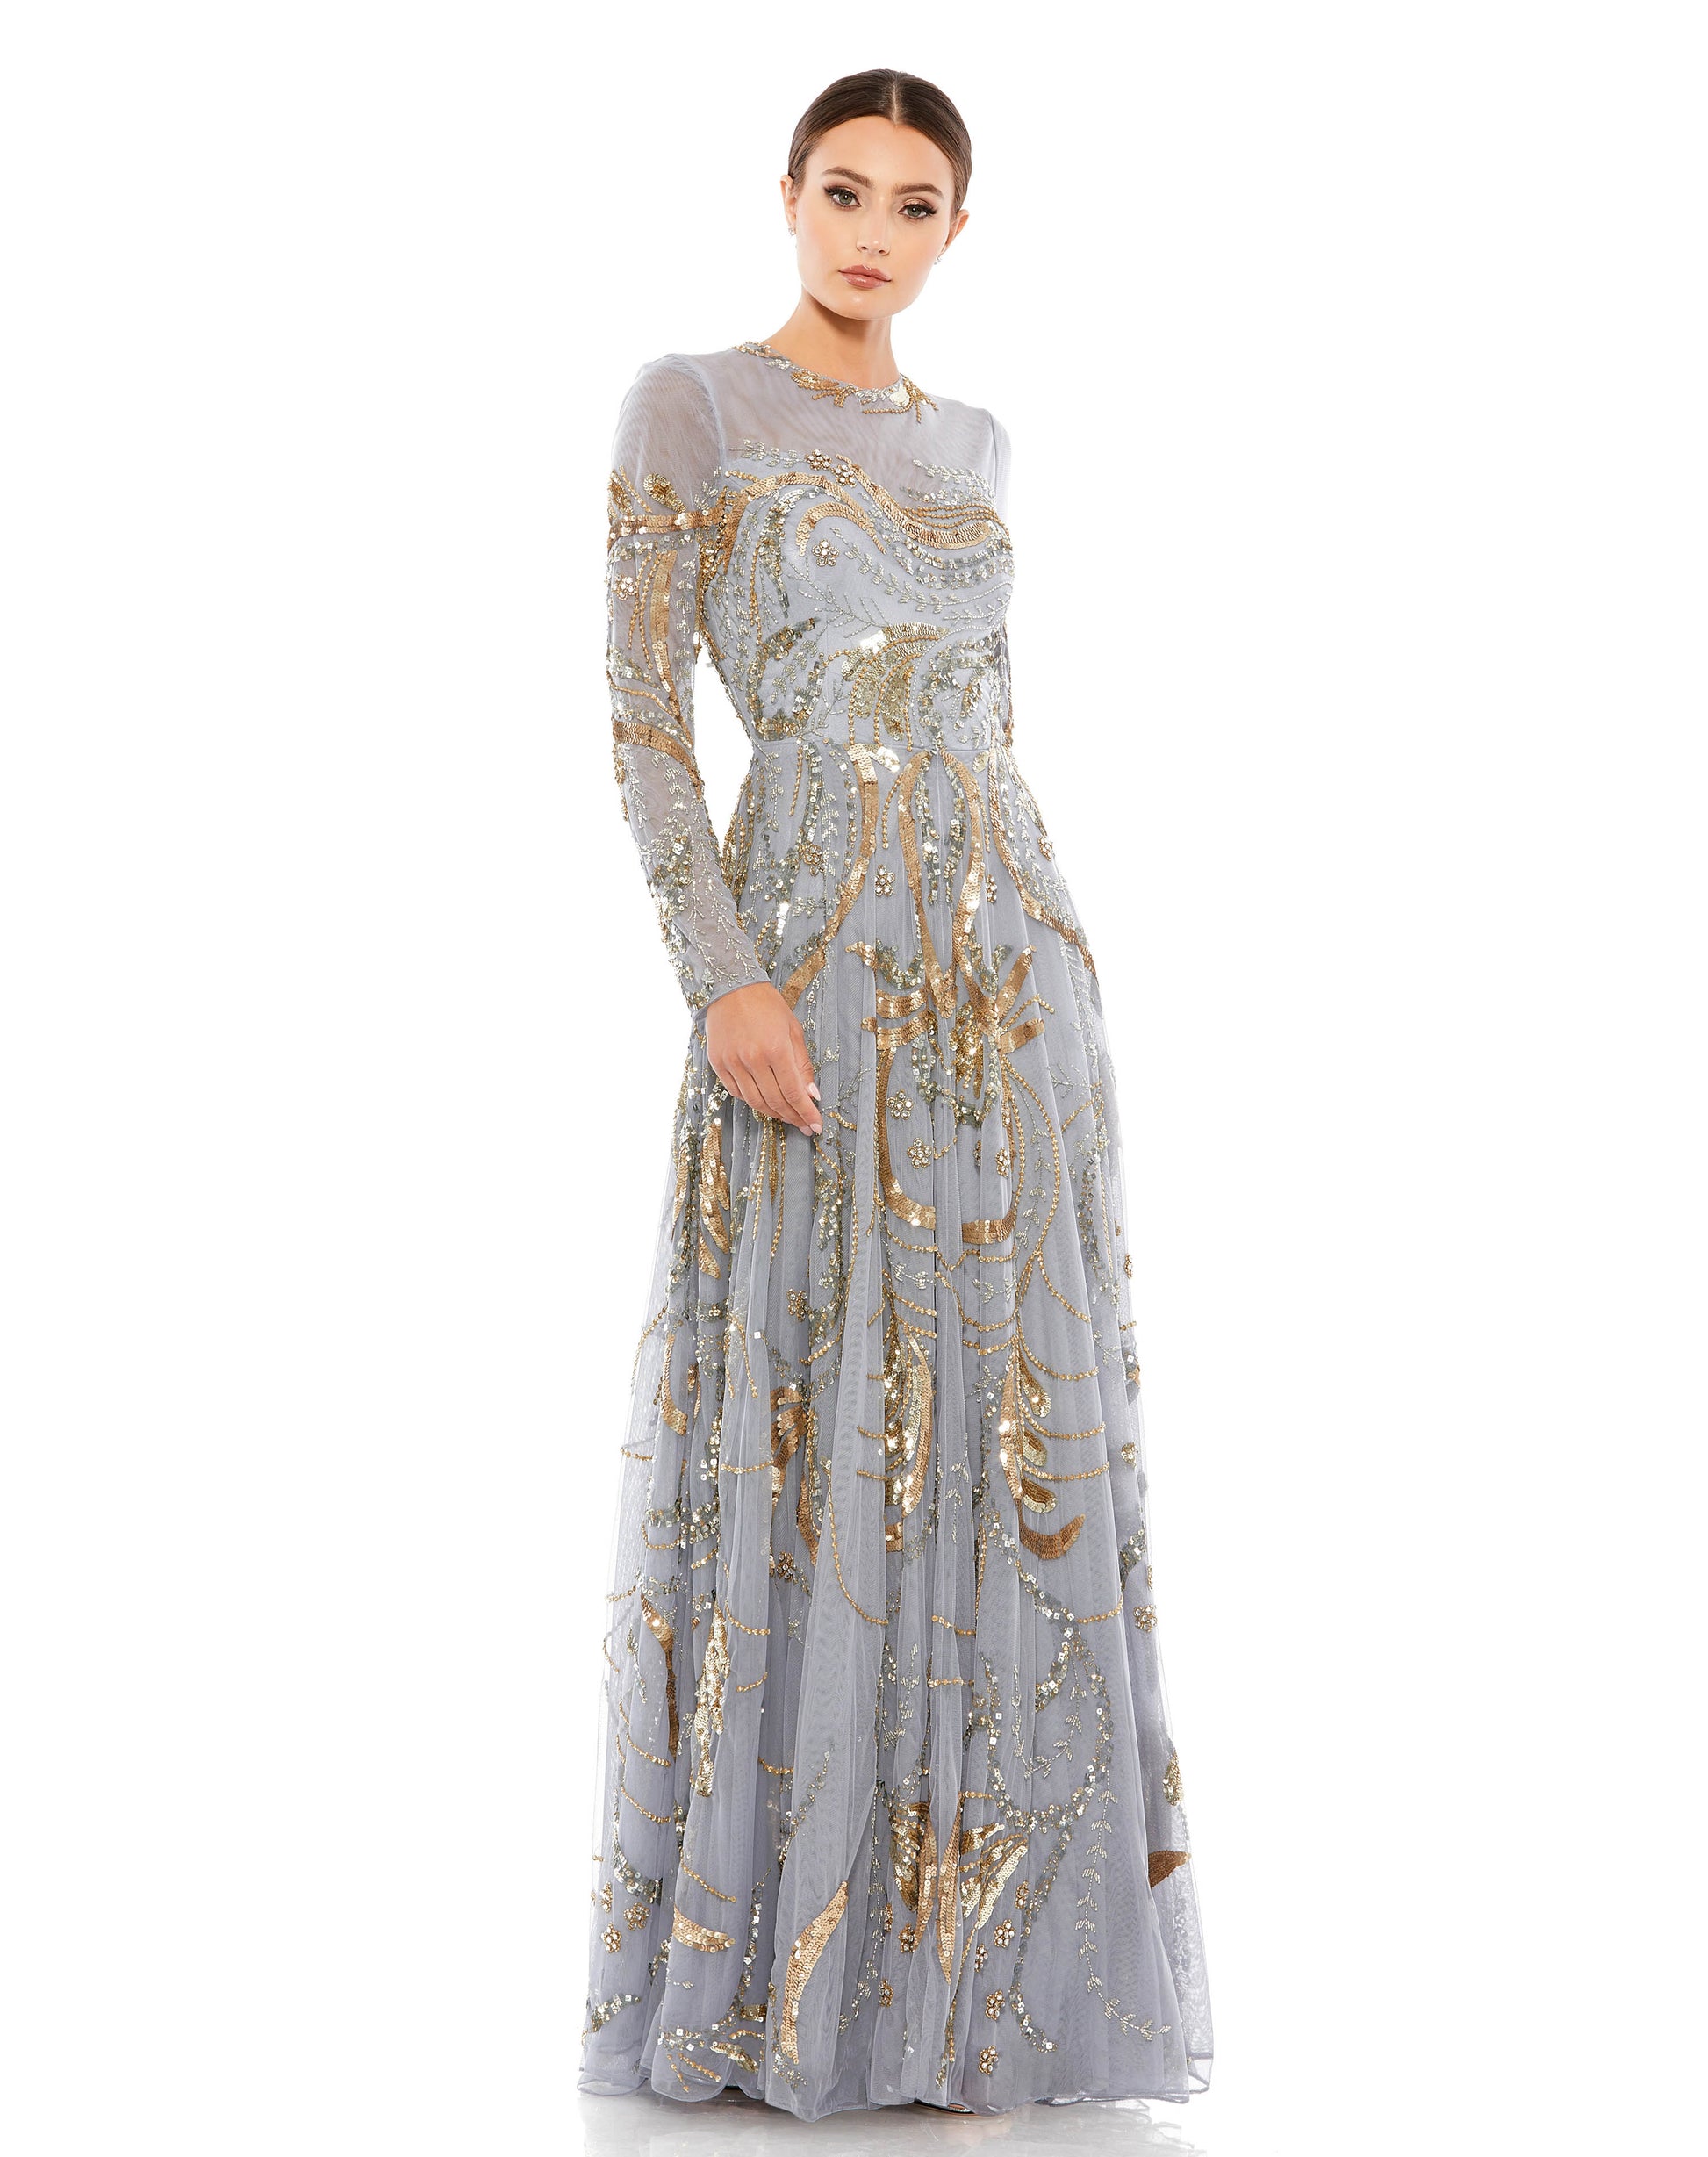 Embellished Illusion High Neck Long Sleeve A Line Gown – Elegant Threads